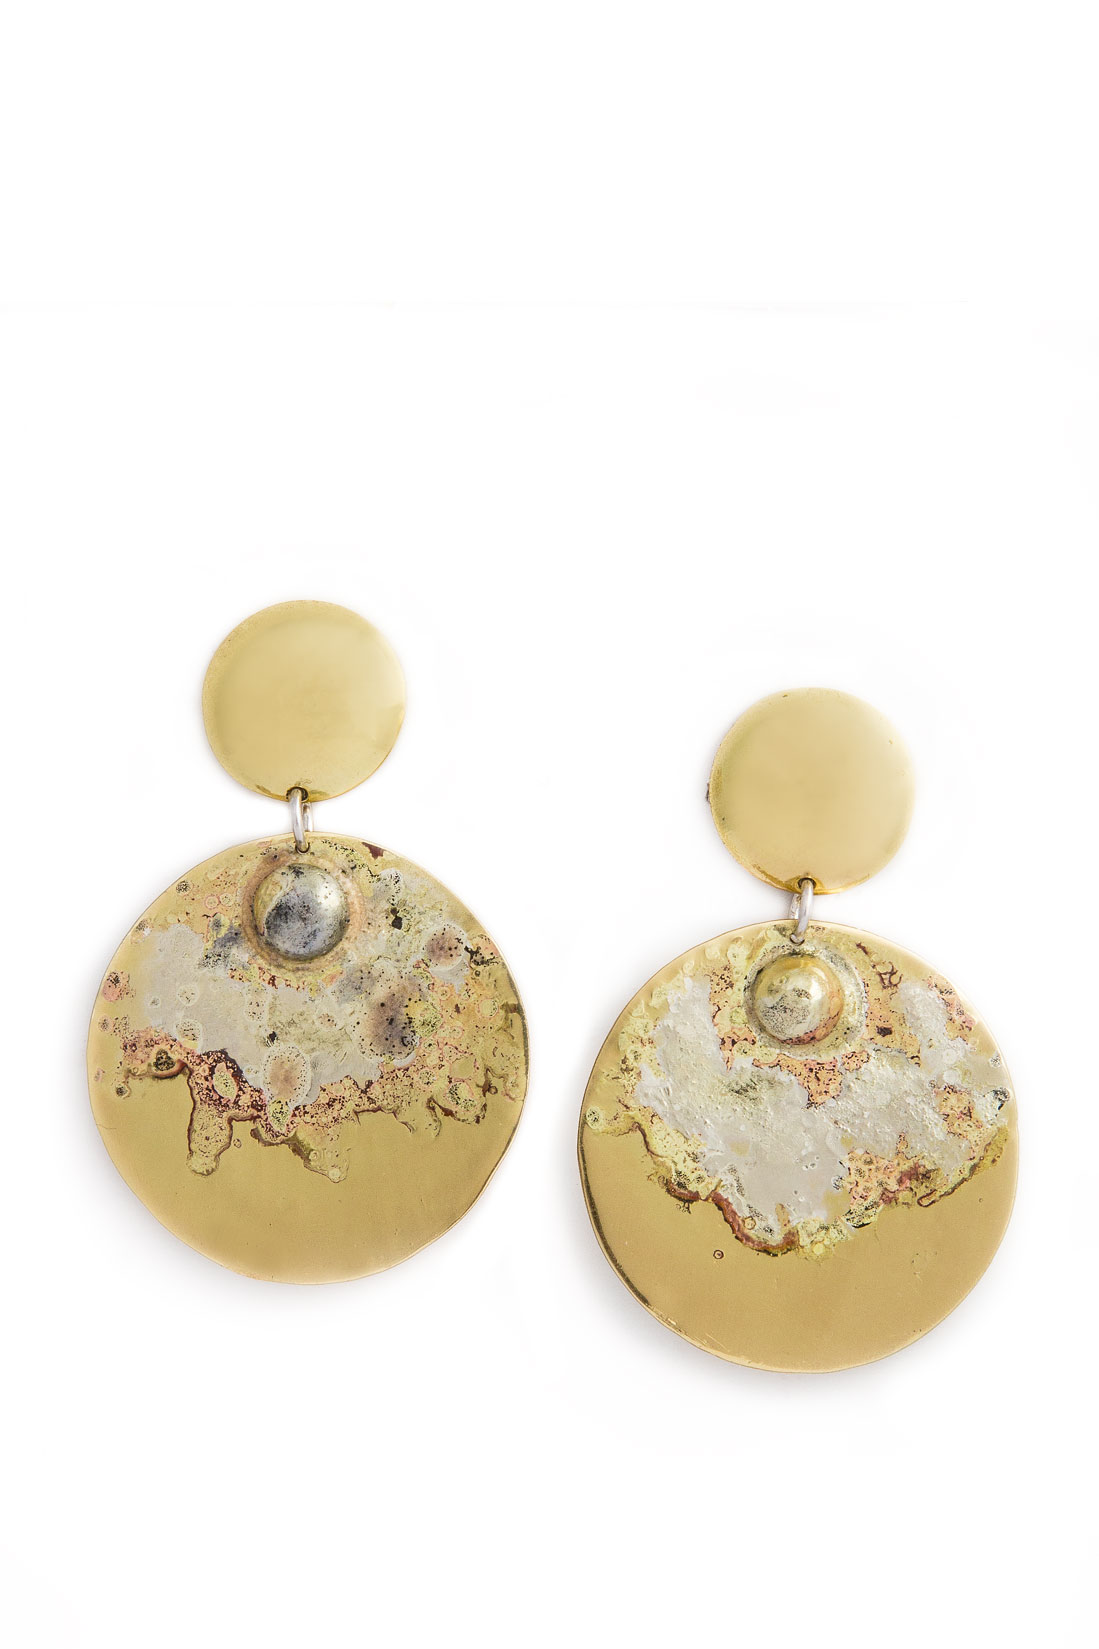 Silver and Brass Round Earrings  Eneada image 0